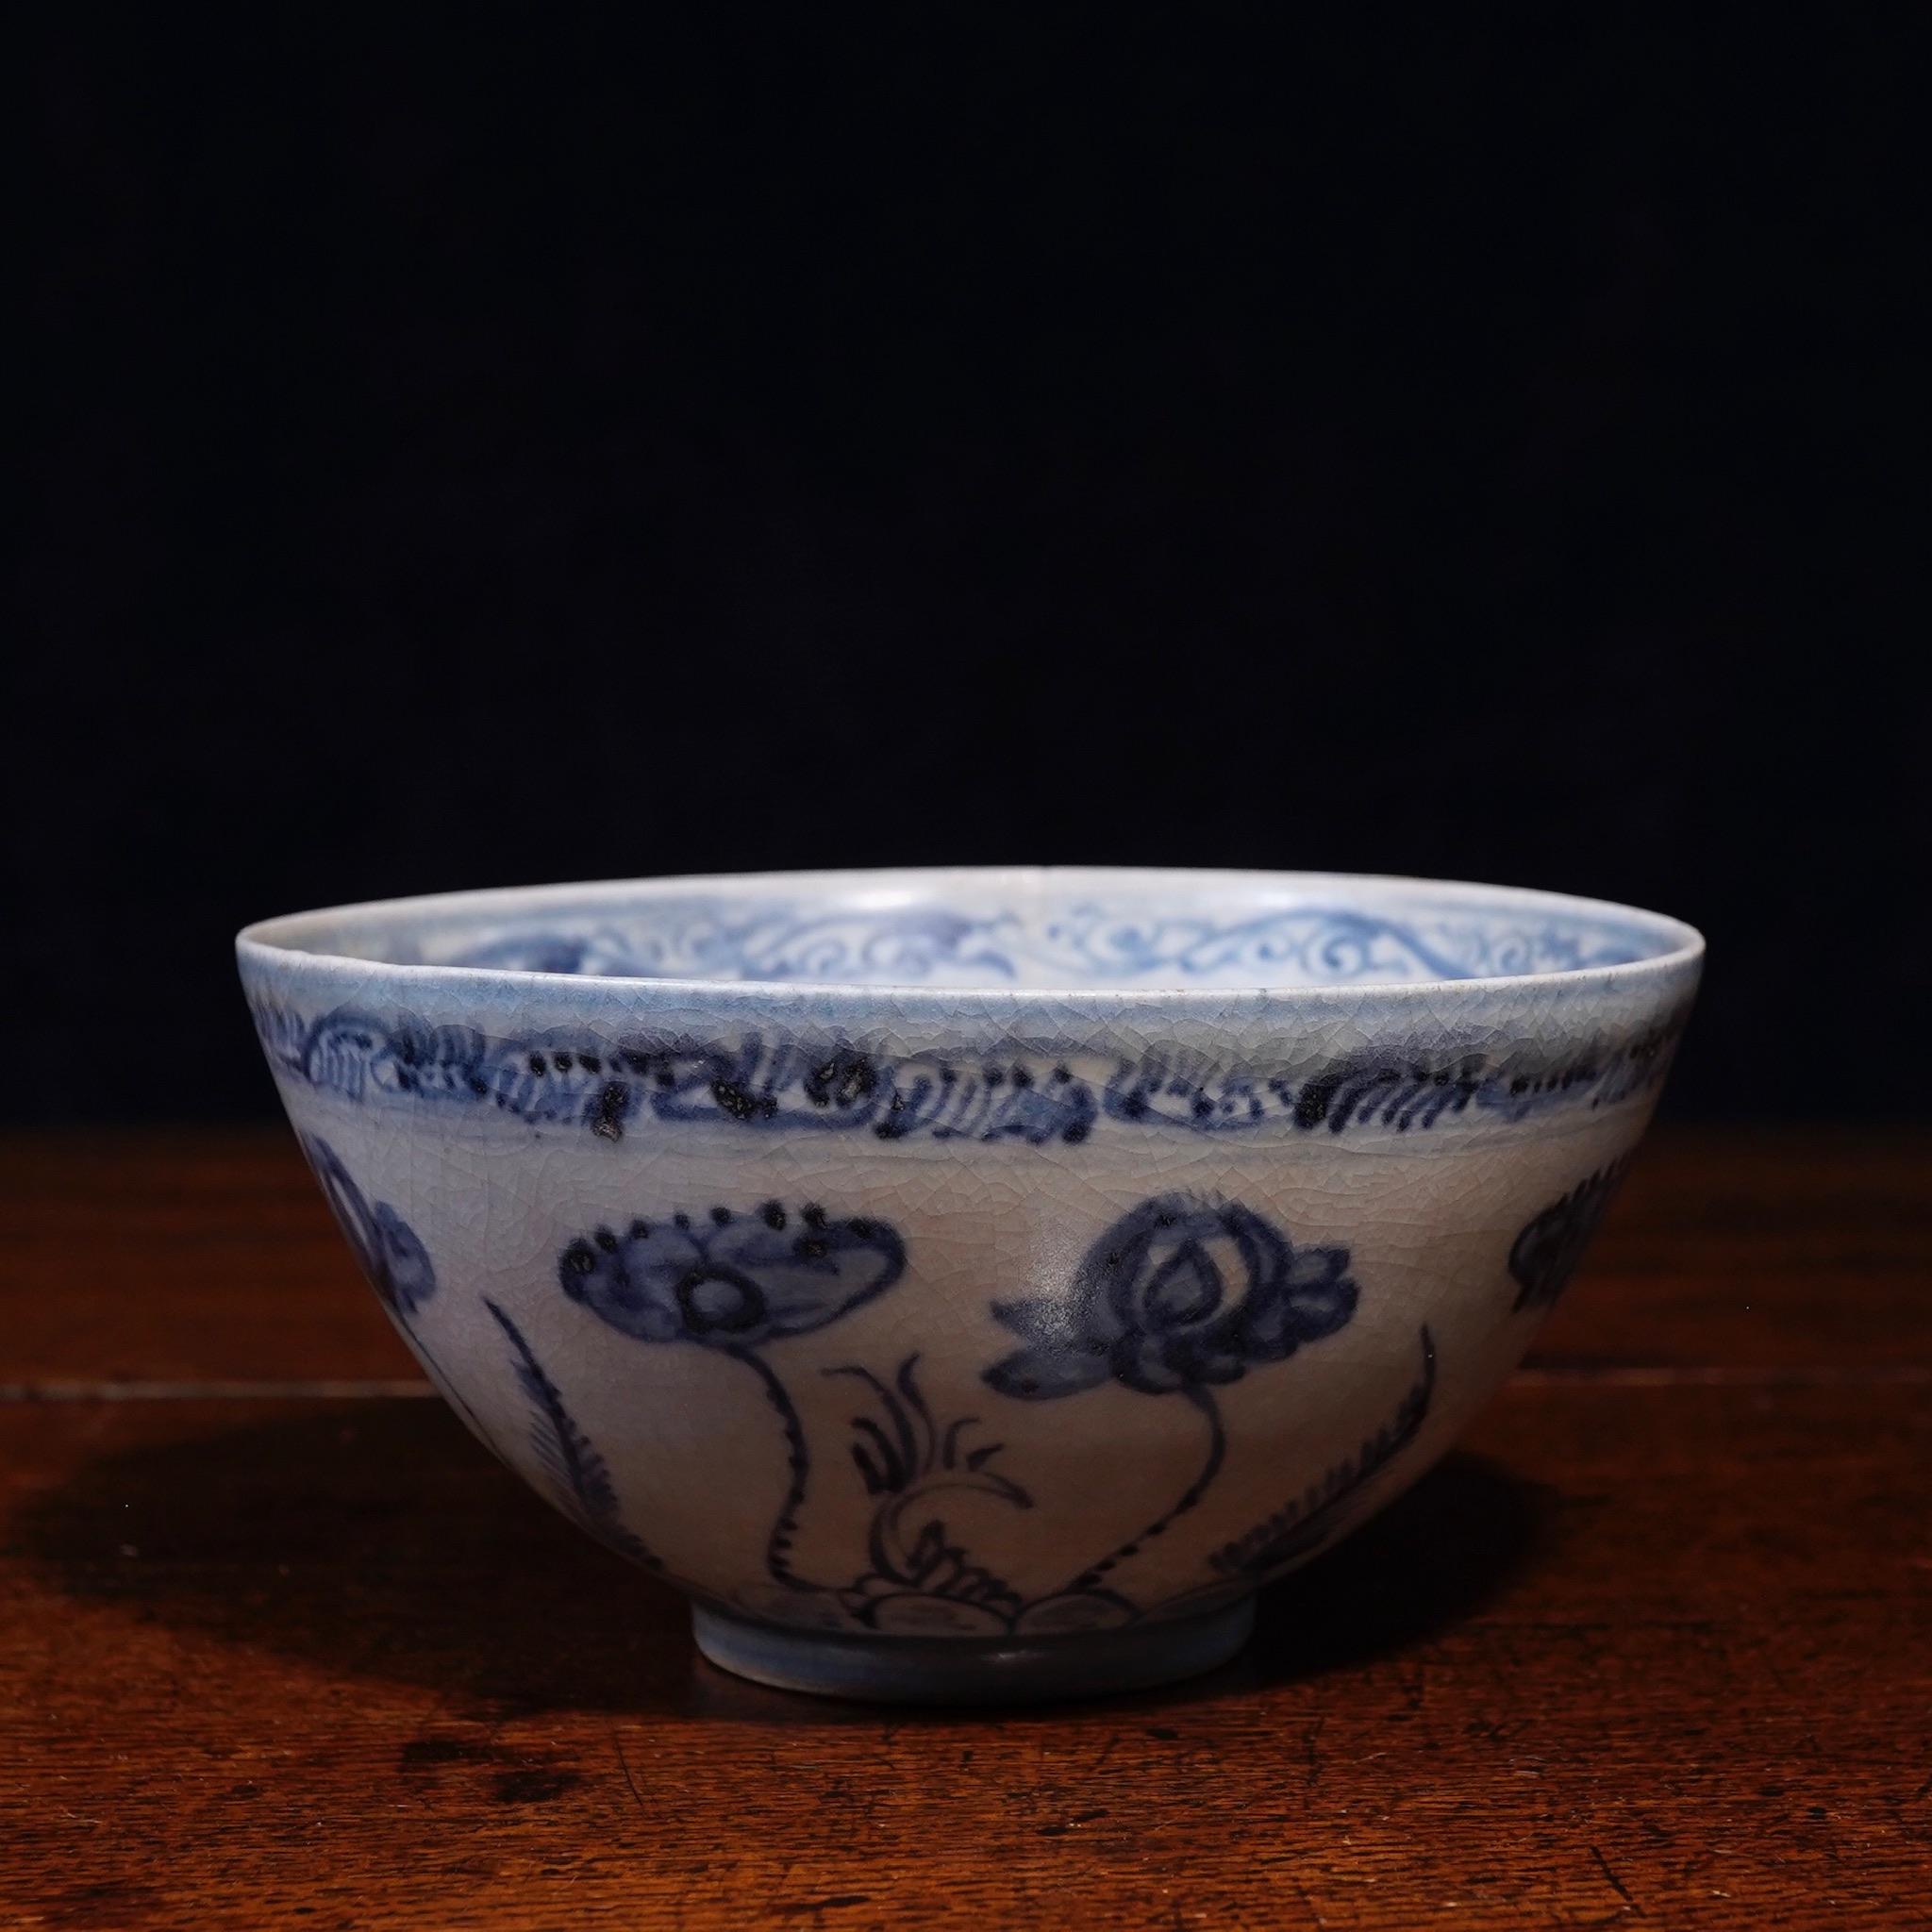 Chinese porcelain blue and white 'Lotus Pond' bowl, painted with a band of tall lotus blooms and fern-like foliage all spiraling in a clock-ways direction, a stylized foliage border to the rim echoed inside above a broad band of scrolling